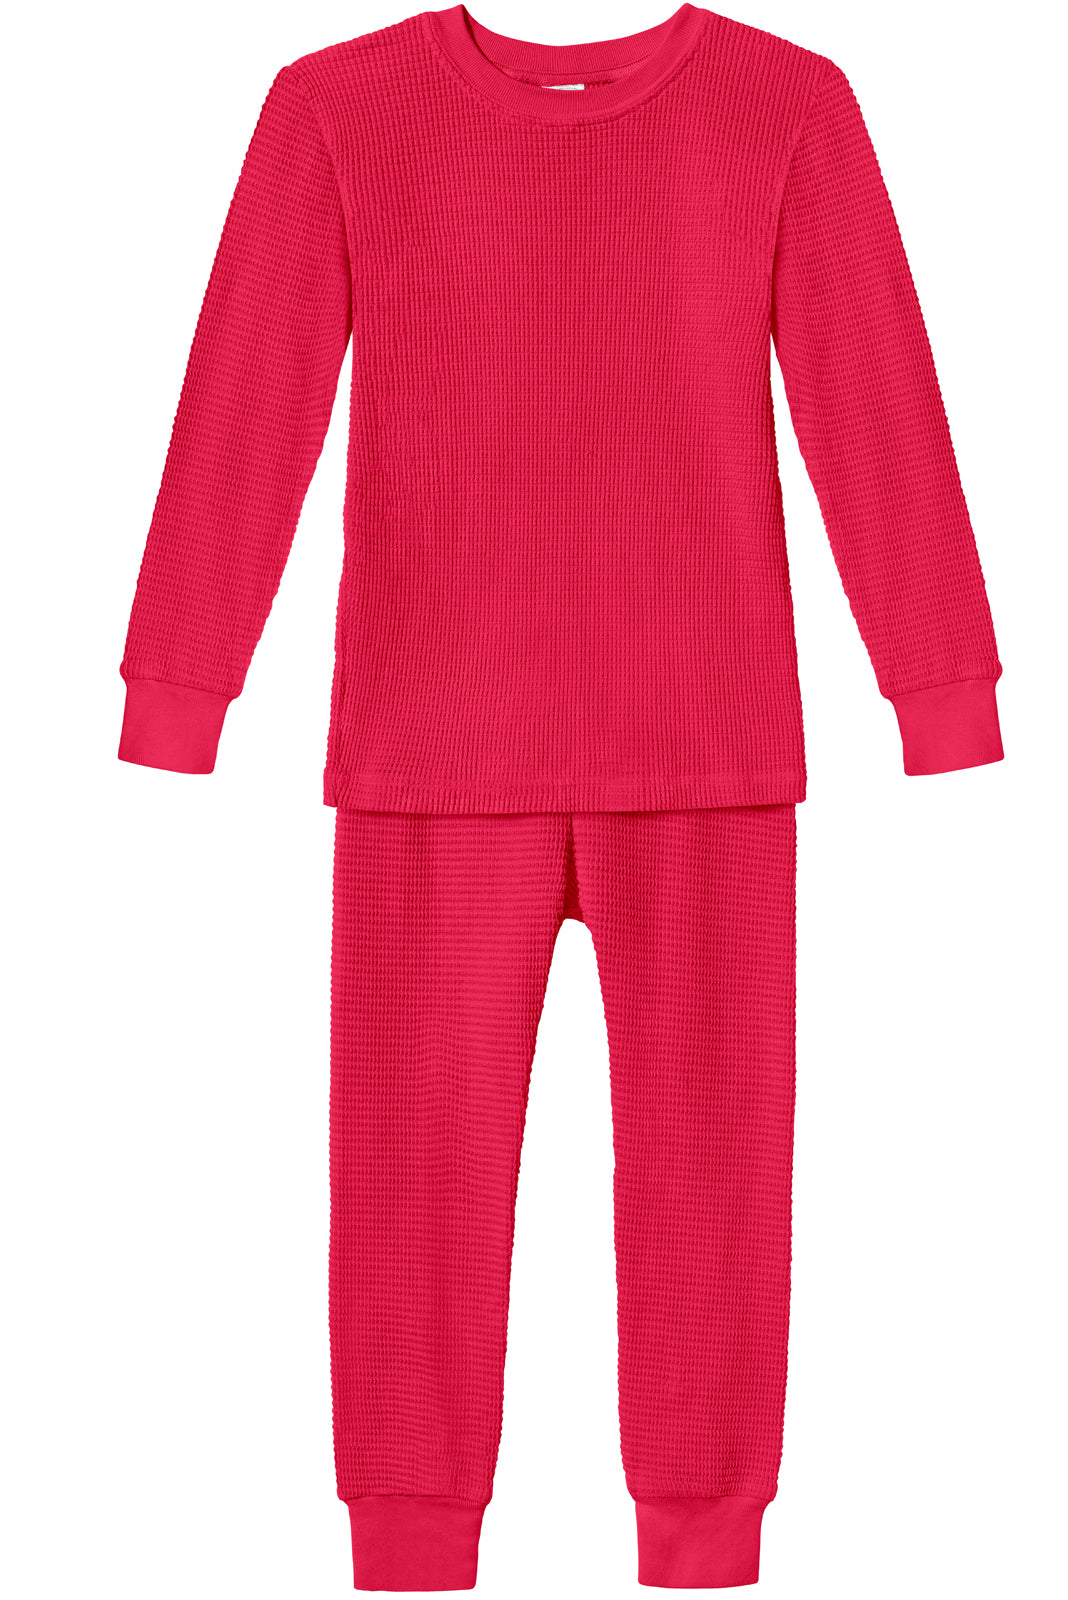 Boys and Girls 100% Cotton Soft &amp; Warm Heavier Thermal Long John Set | Candy Apple